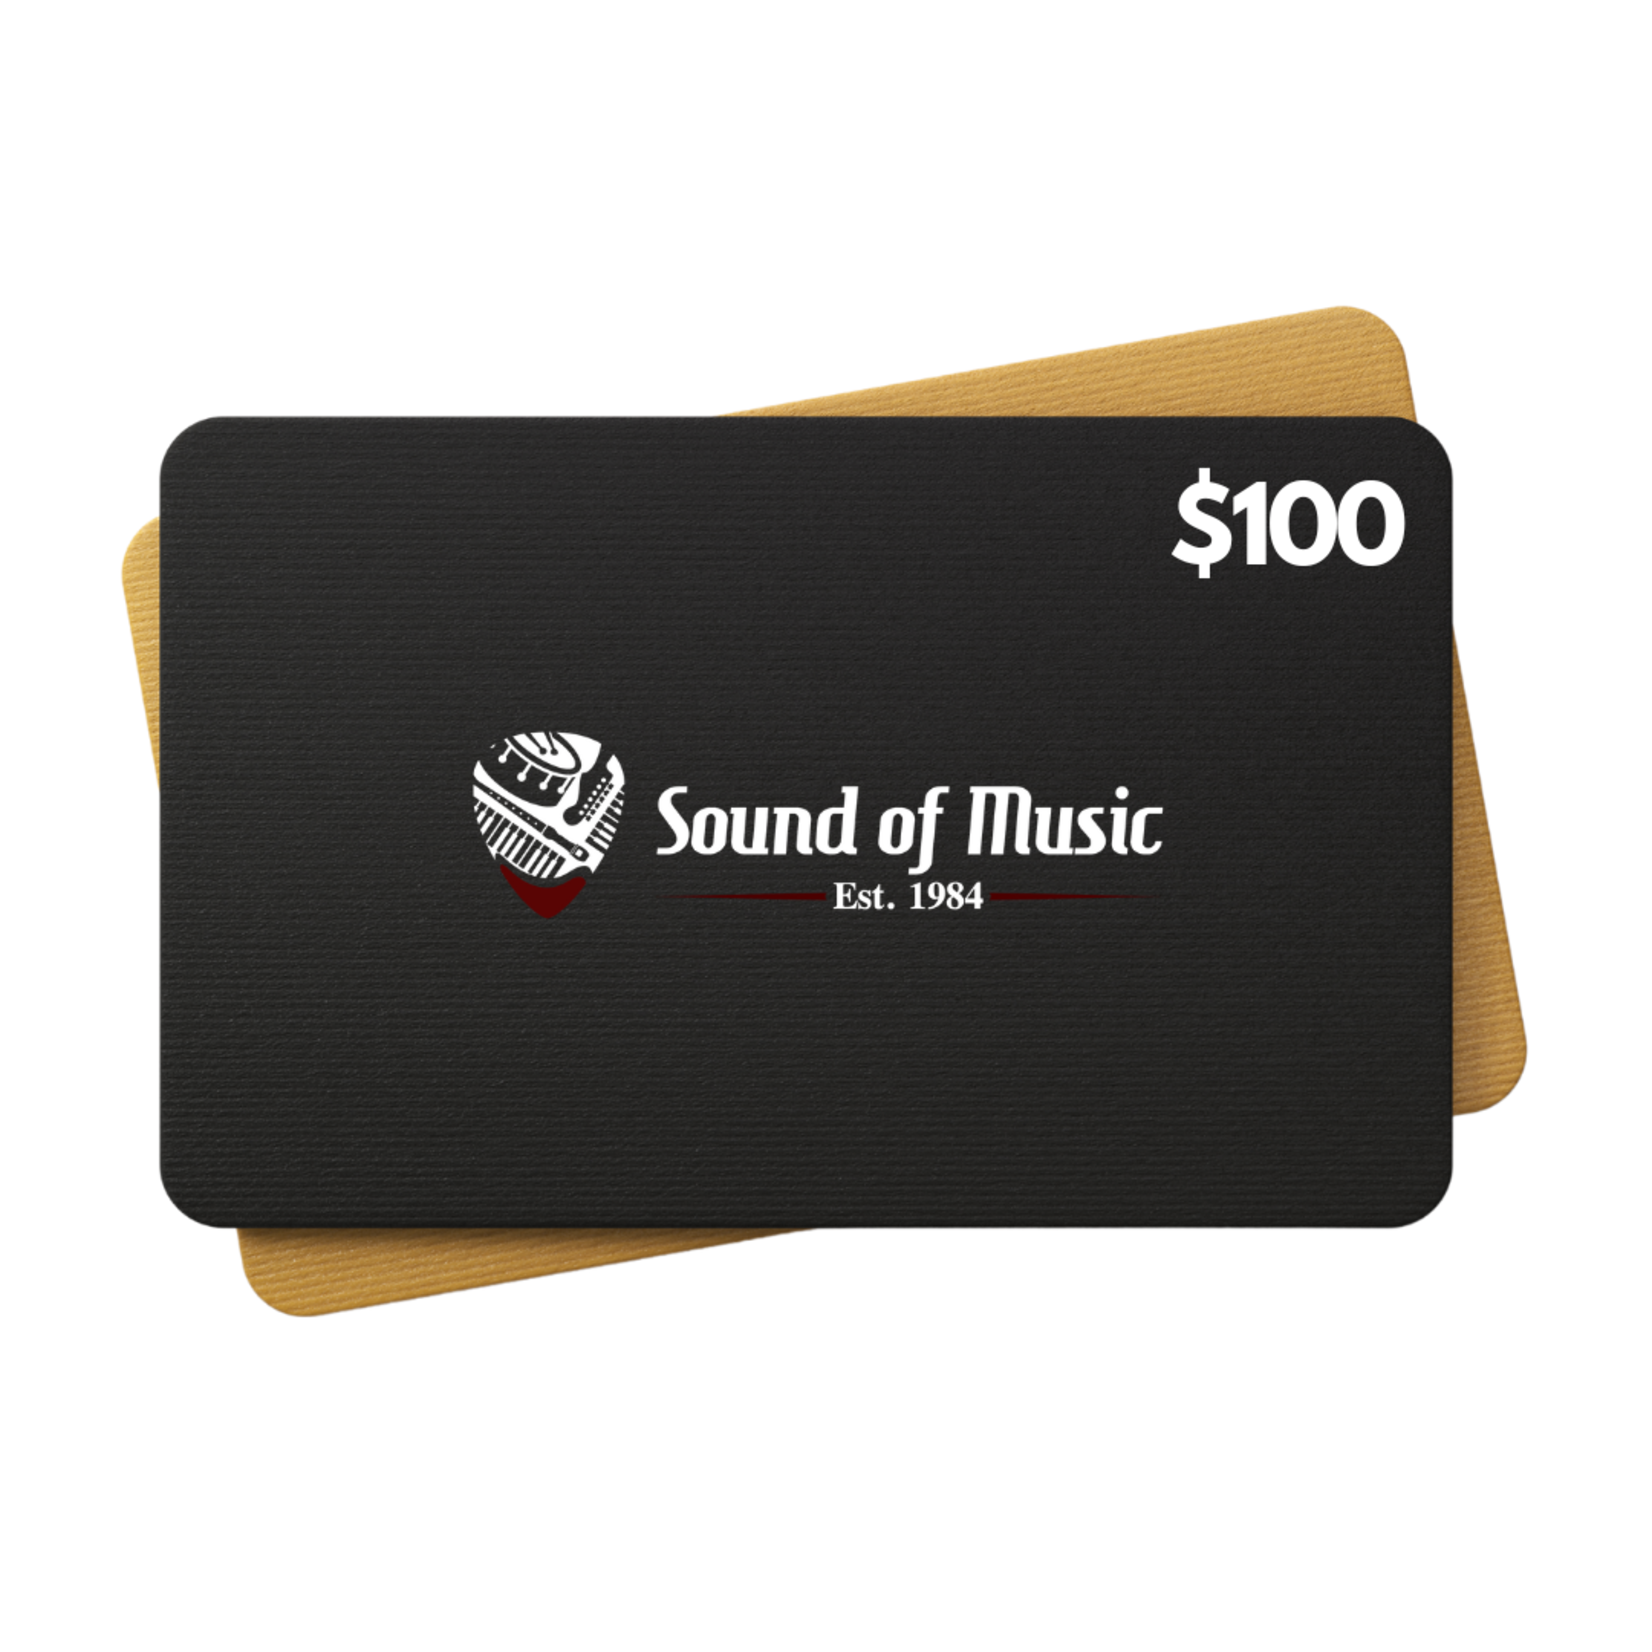 Sound of Music Gift Card - $100